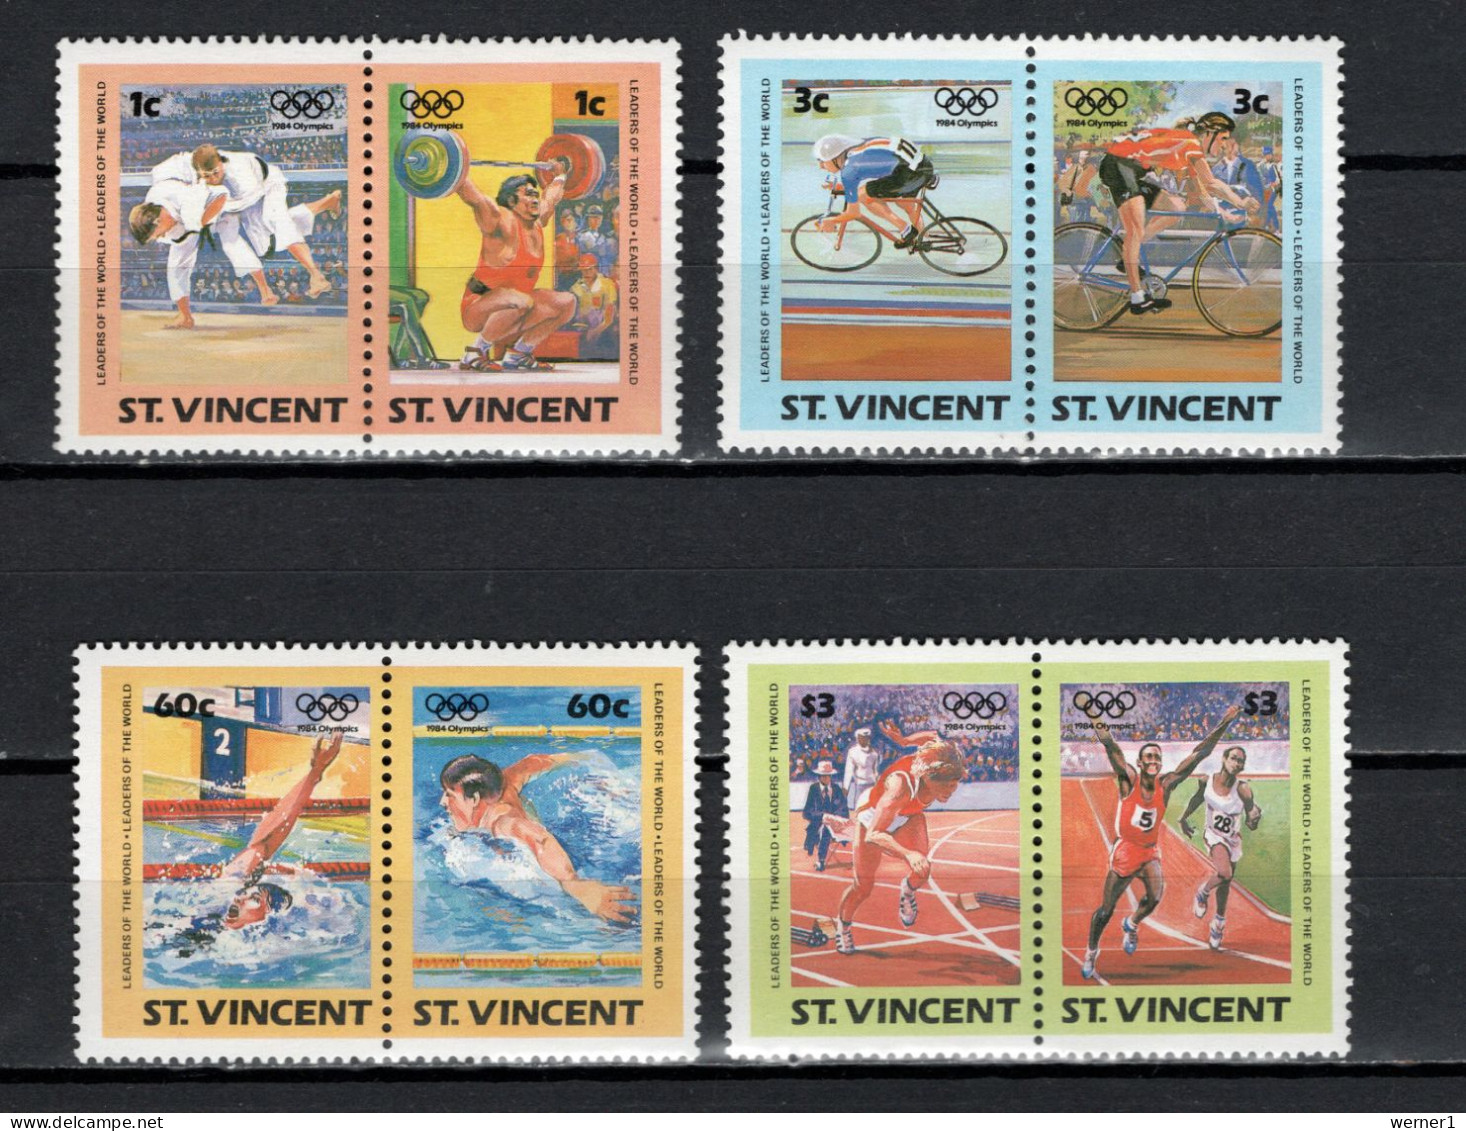 St. Vincent 1984 Olympic Games Los Angeles, Judo, Weightlifting, Cycling, Swimming, Athletics Set Of 8 MNH - Estate 1984: Los Angeles